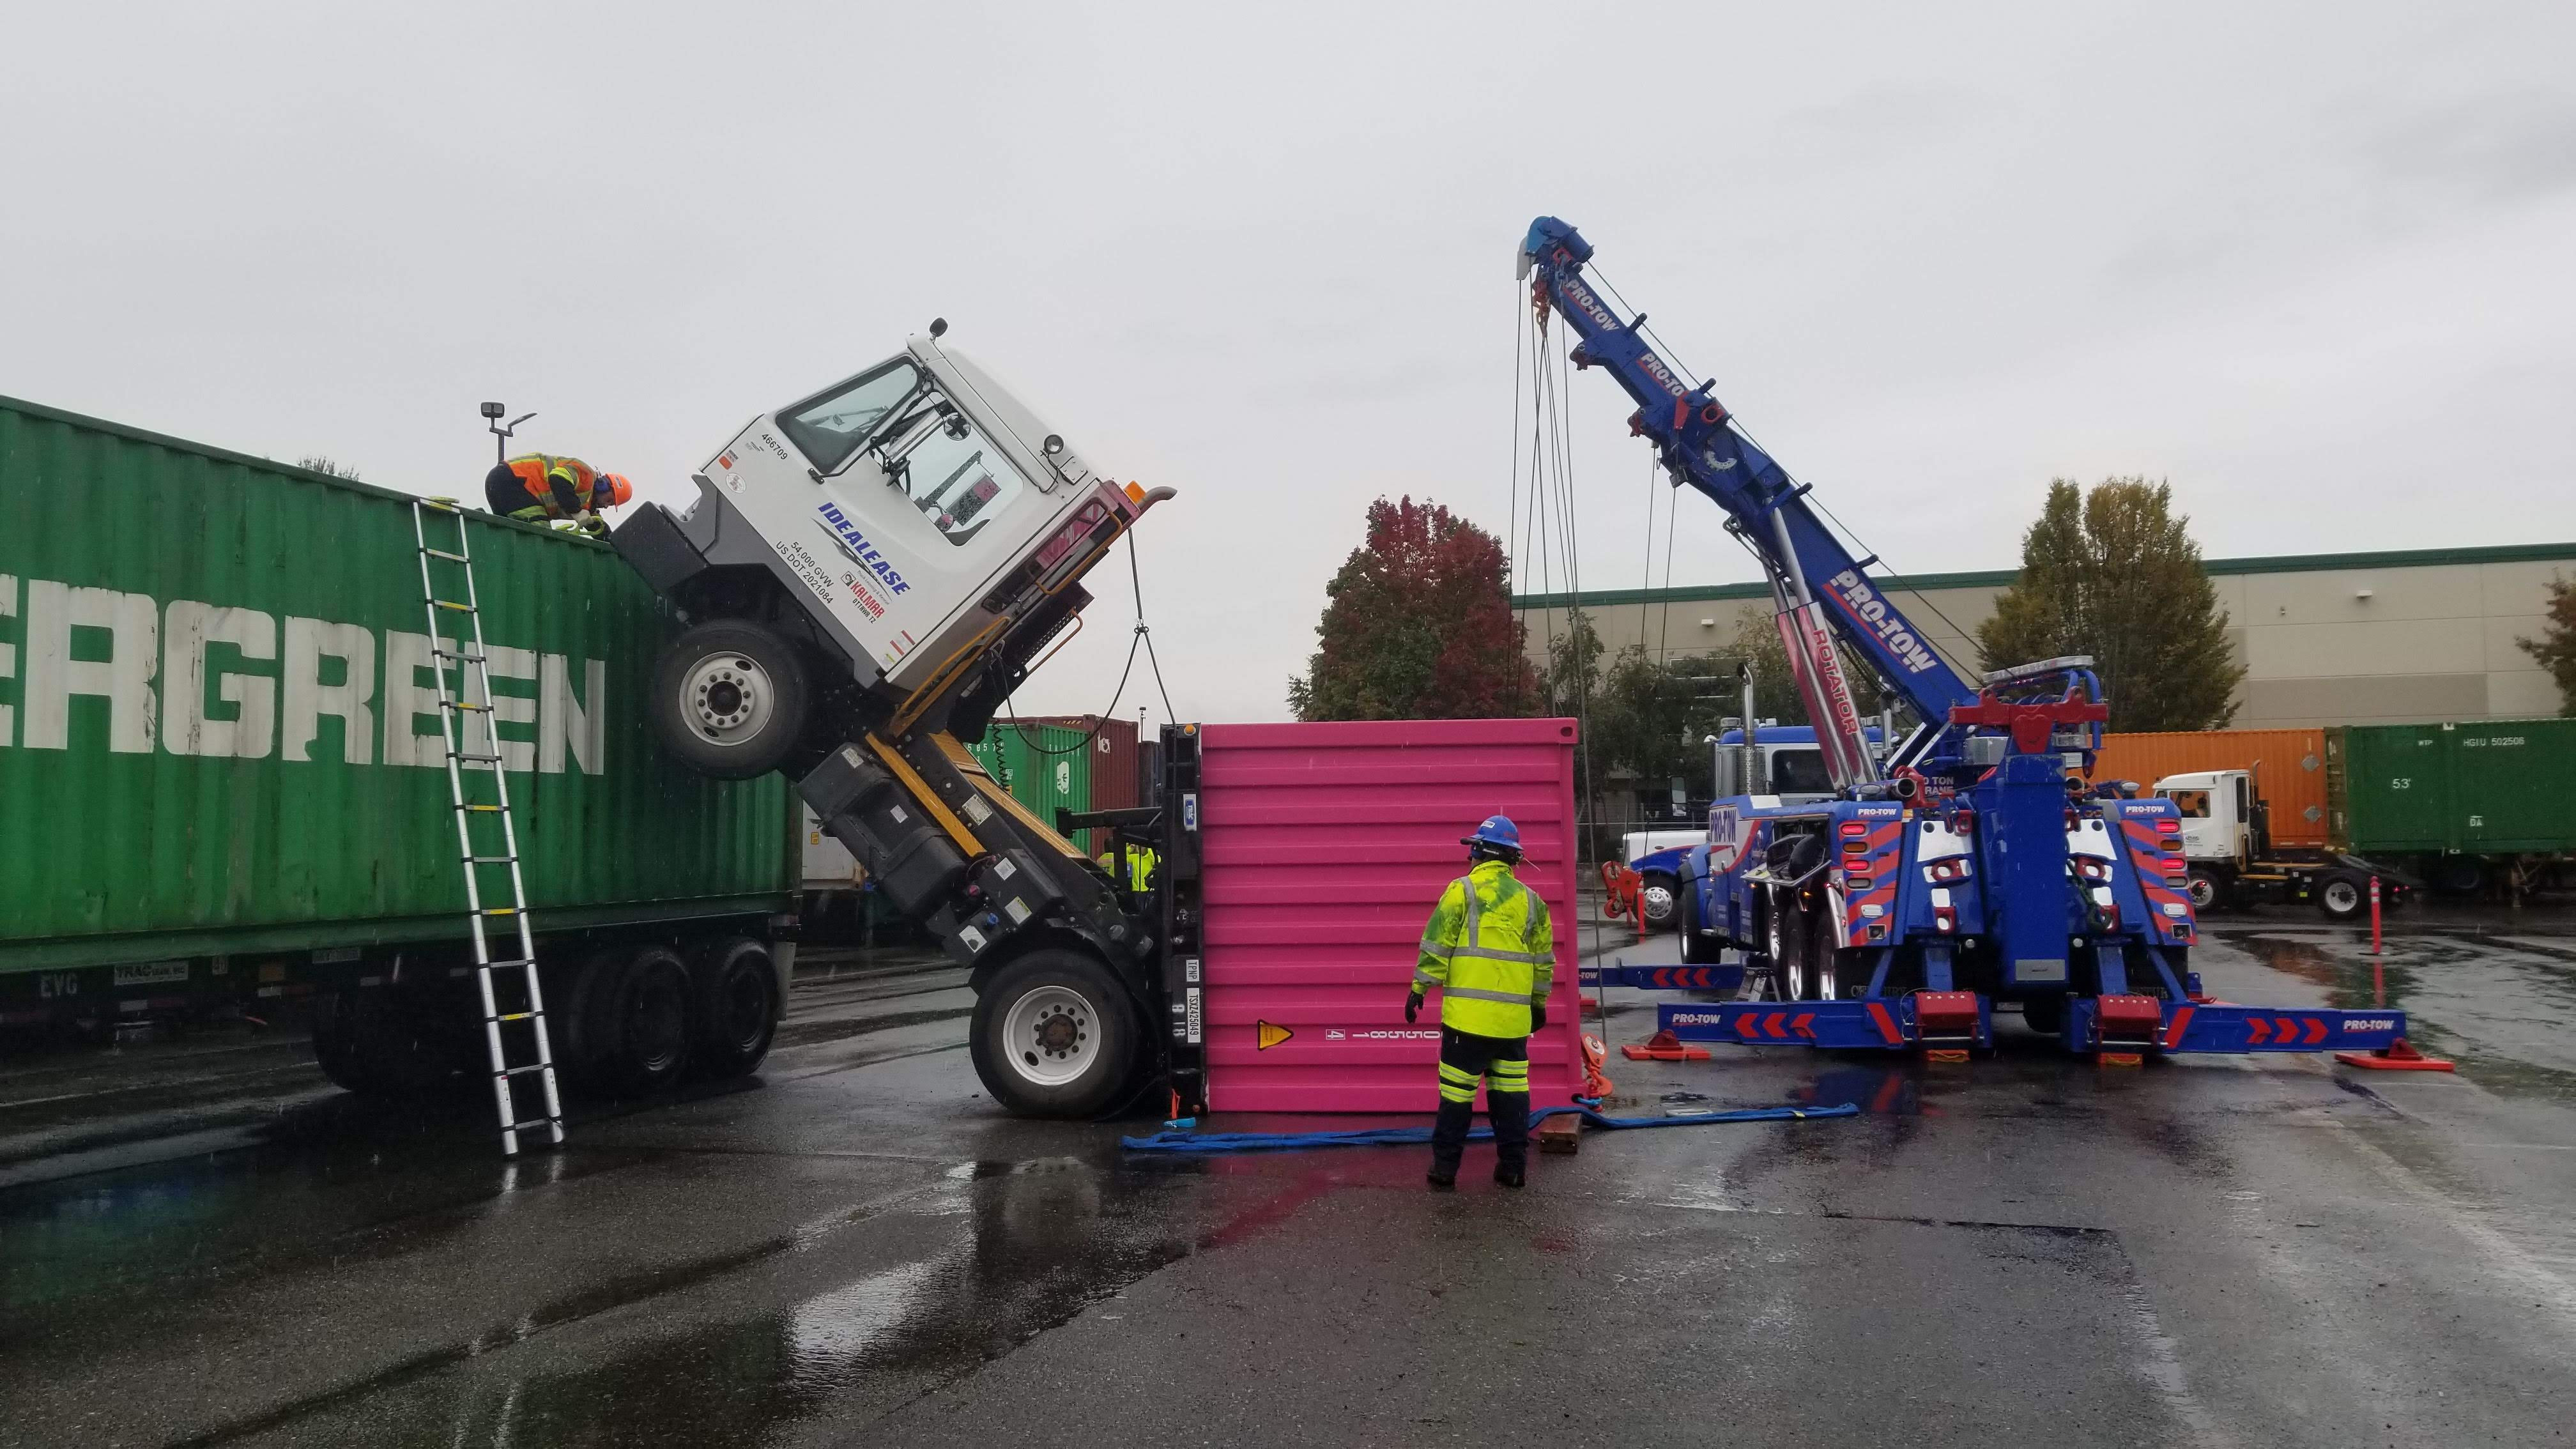 Wheelie! Yard Goat and Shipping Container Overturned in Sumner, WA